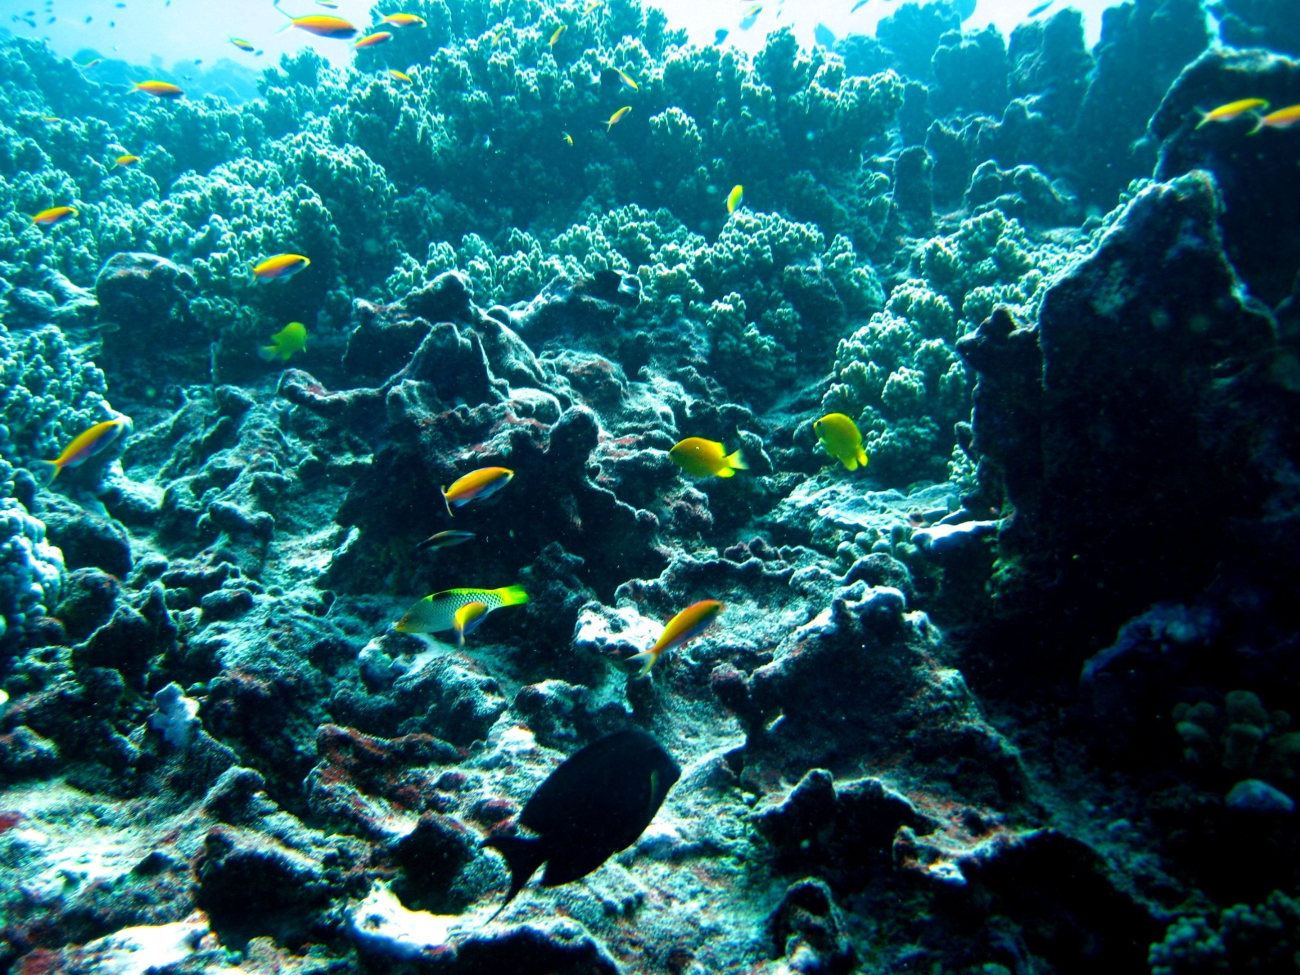 Reef scene with anthias and damselfish